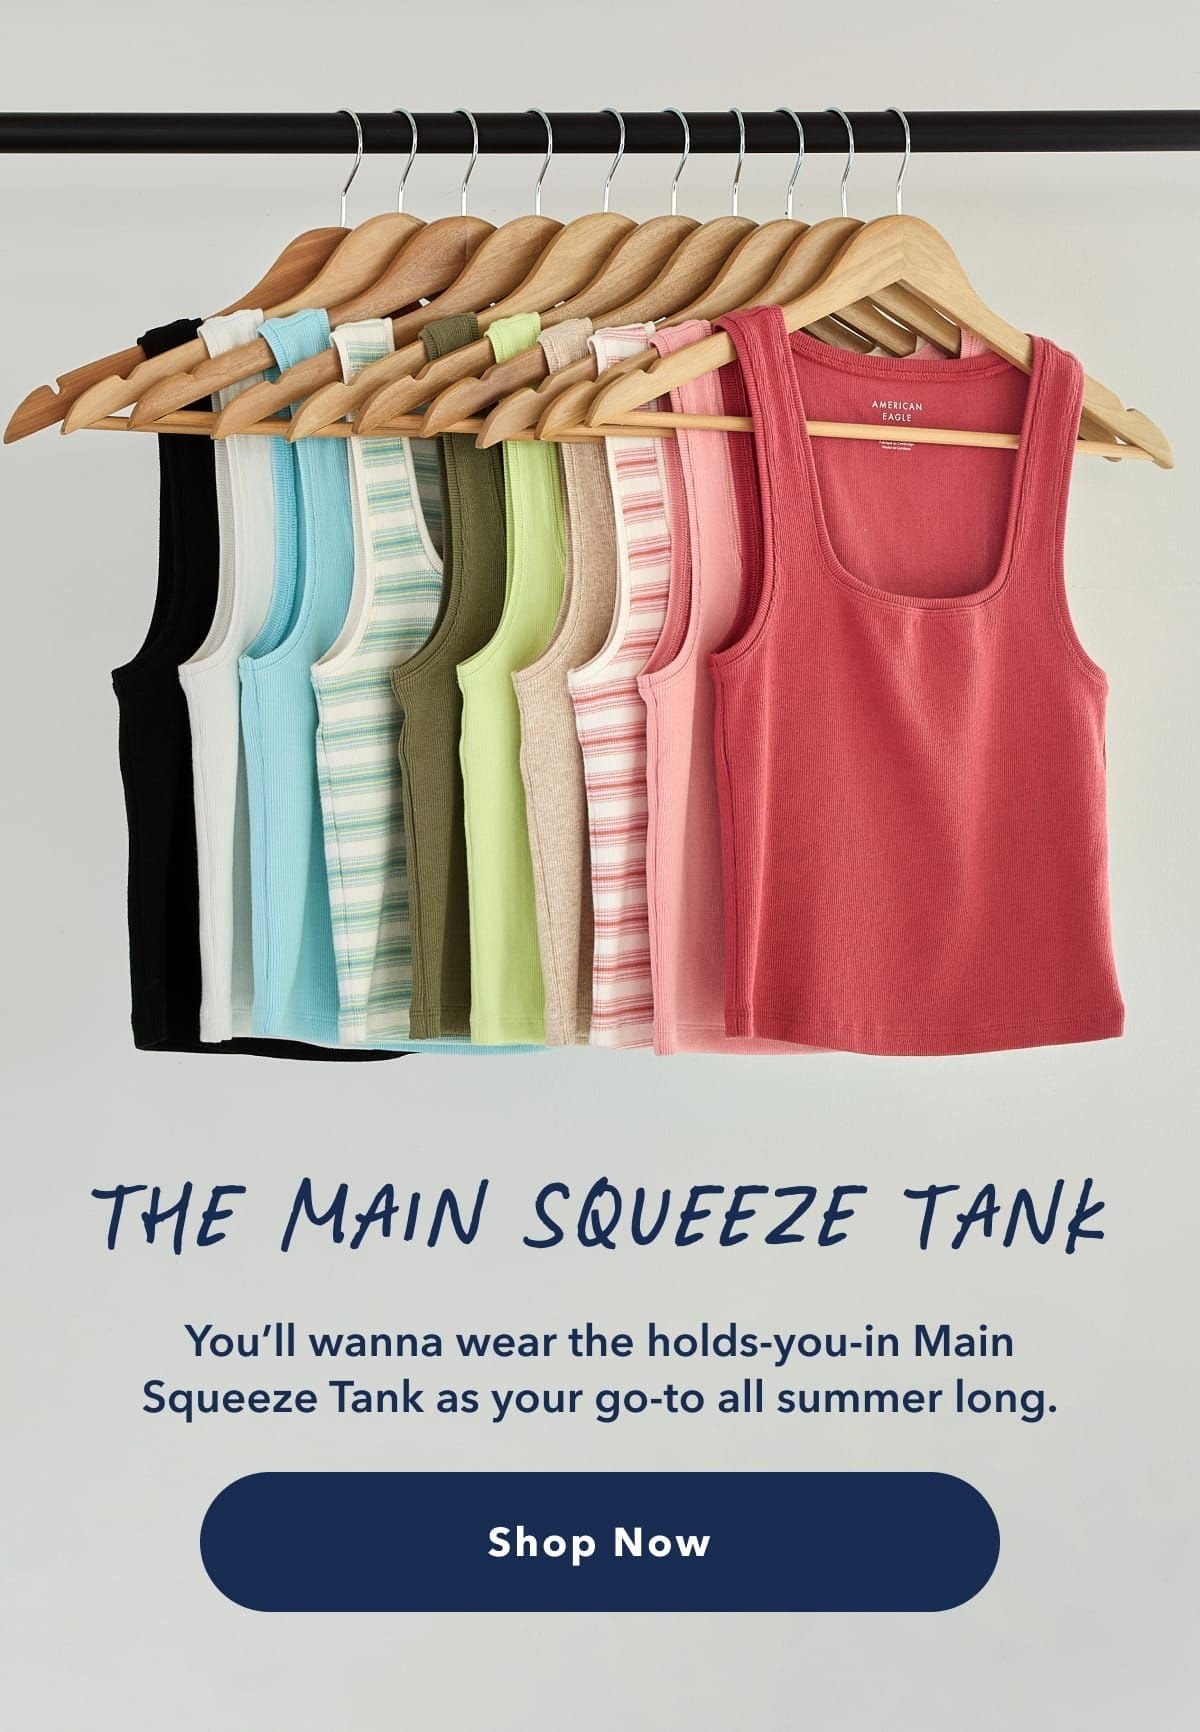 The Main Squeeze Tank | You’ll wanna wear the holds-you-in Main Squeeze Tank as your go-to all summer long. | Shop Now